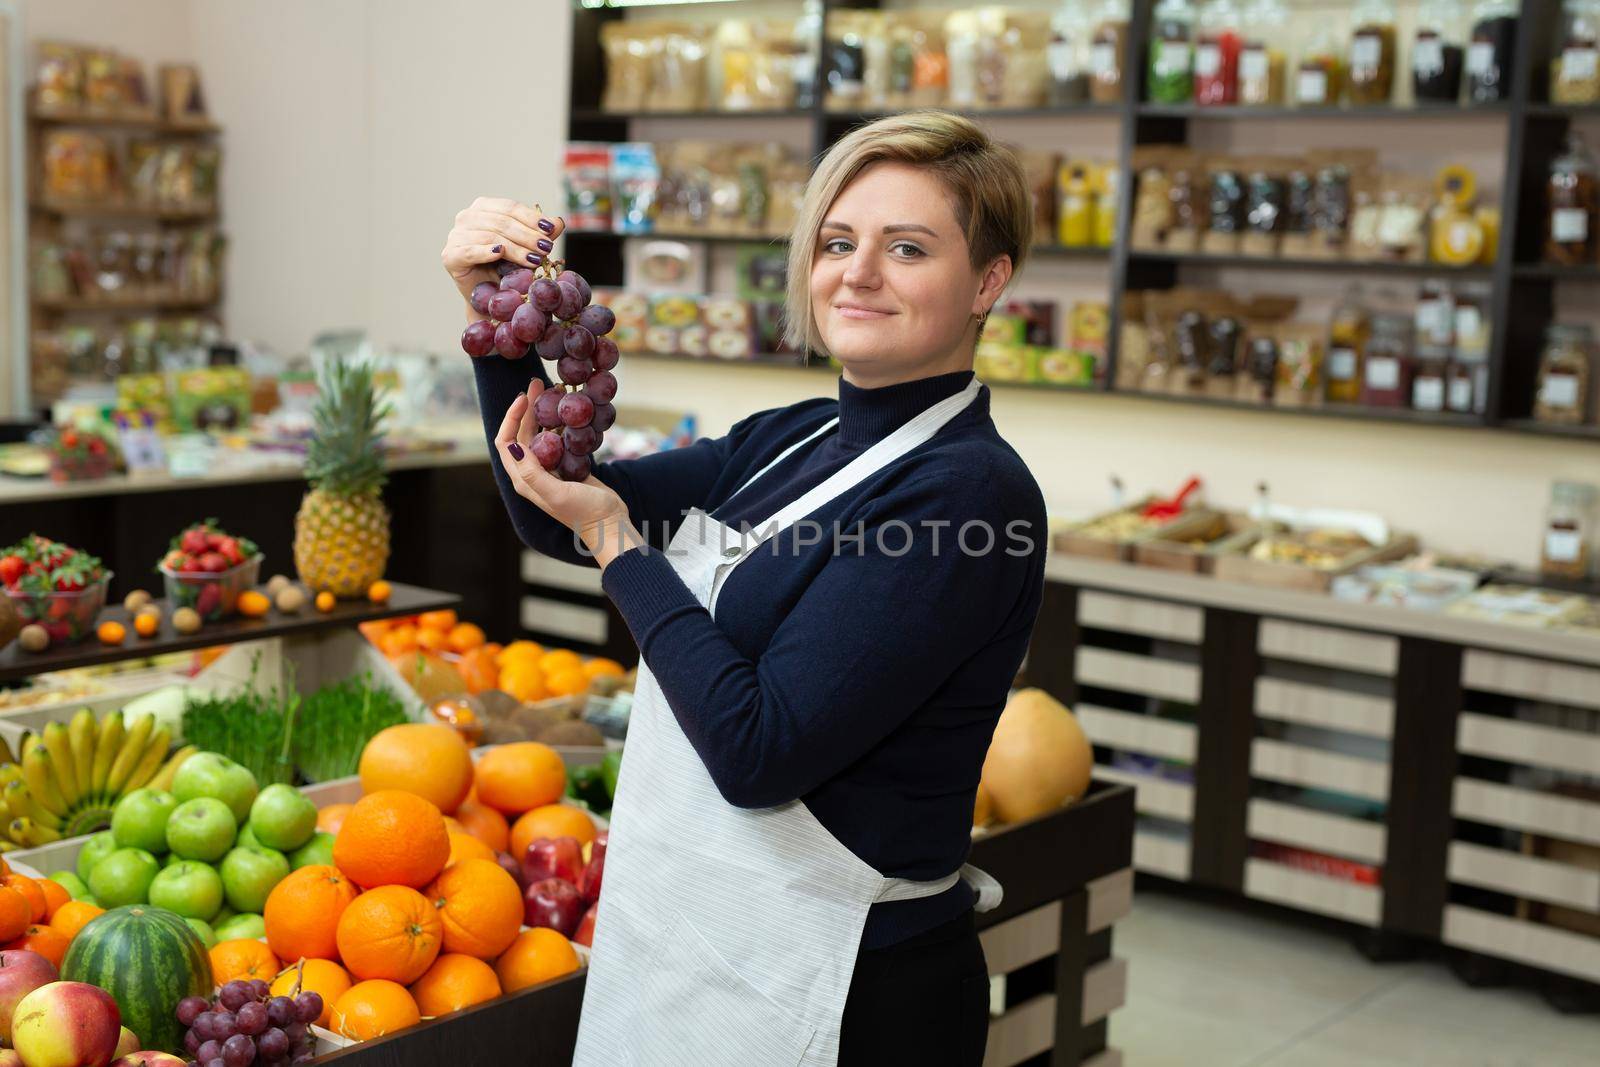 Female saleswoman helps a customer buy fruits and vegetables at a grocery store, holds them in her hands and shows them grapes.